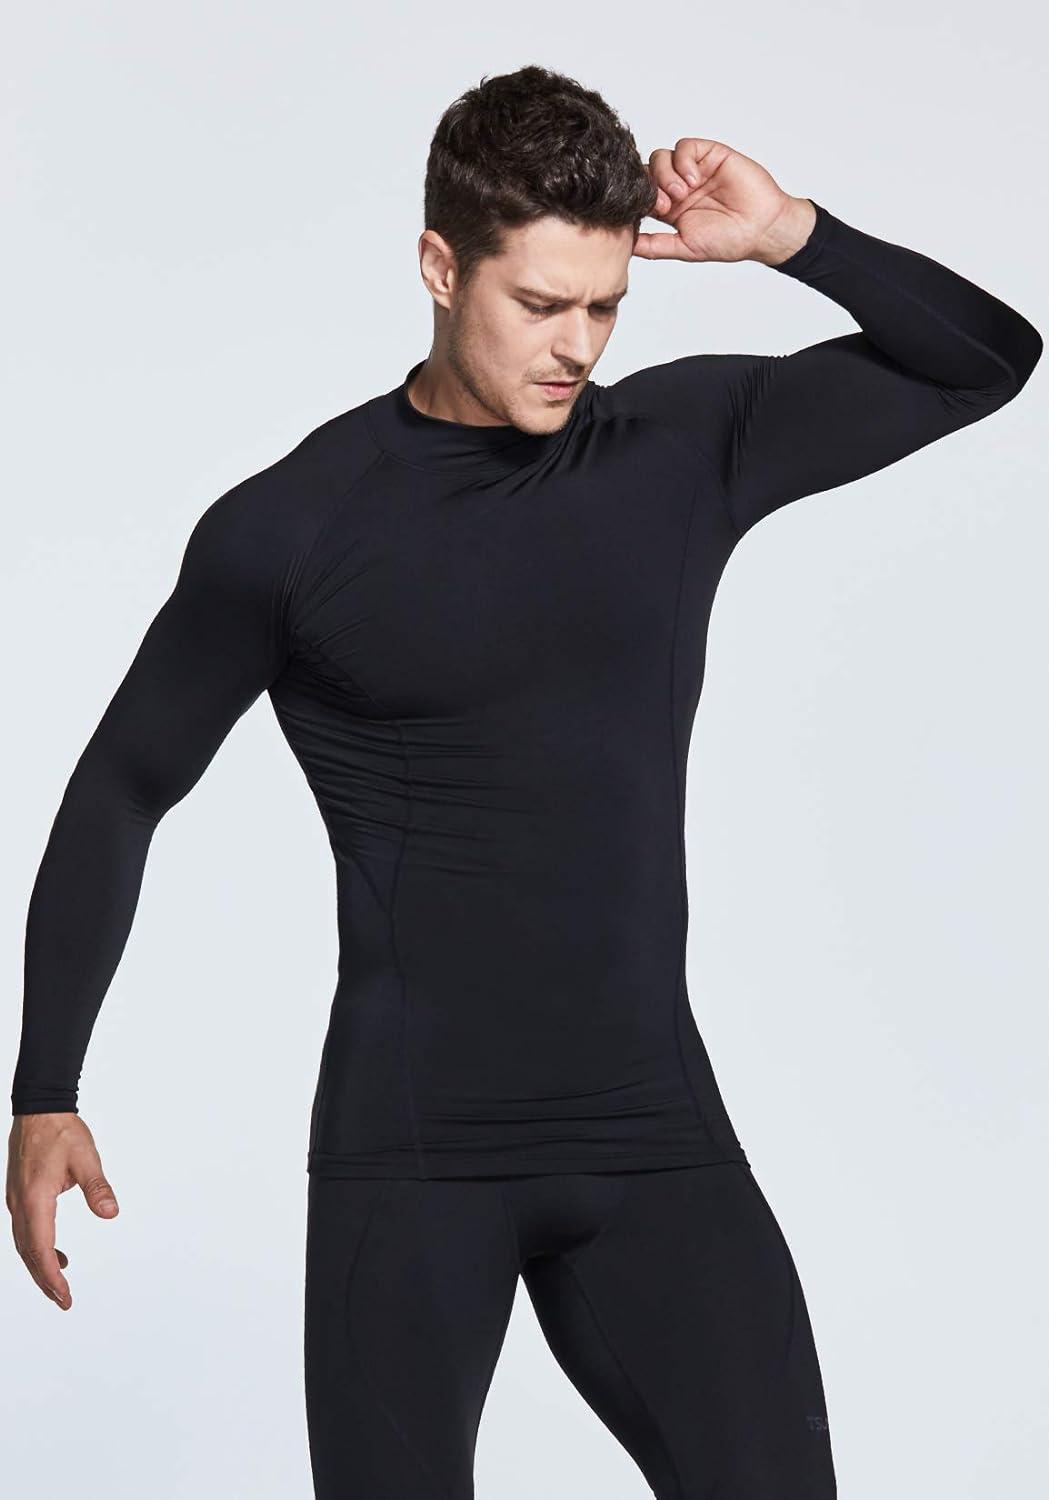 Mens Hoodie With Face Mask Turtleneck Compression Tee Tops Running